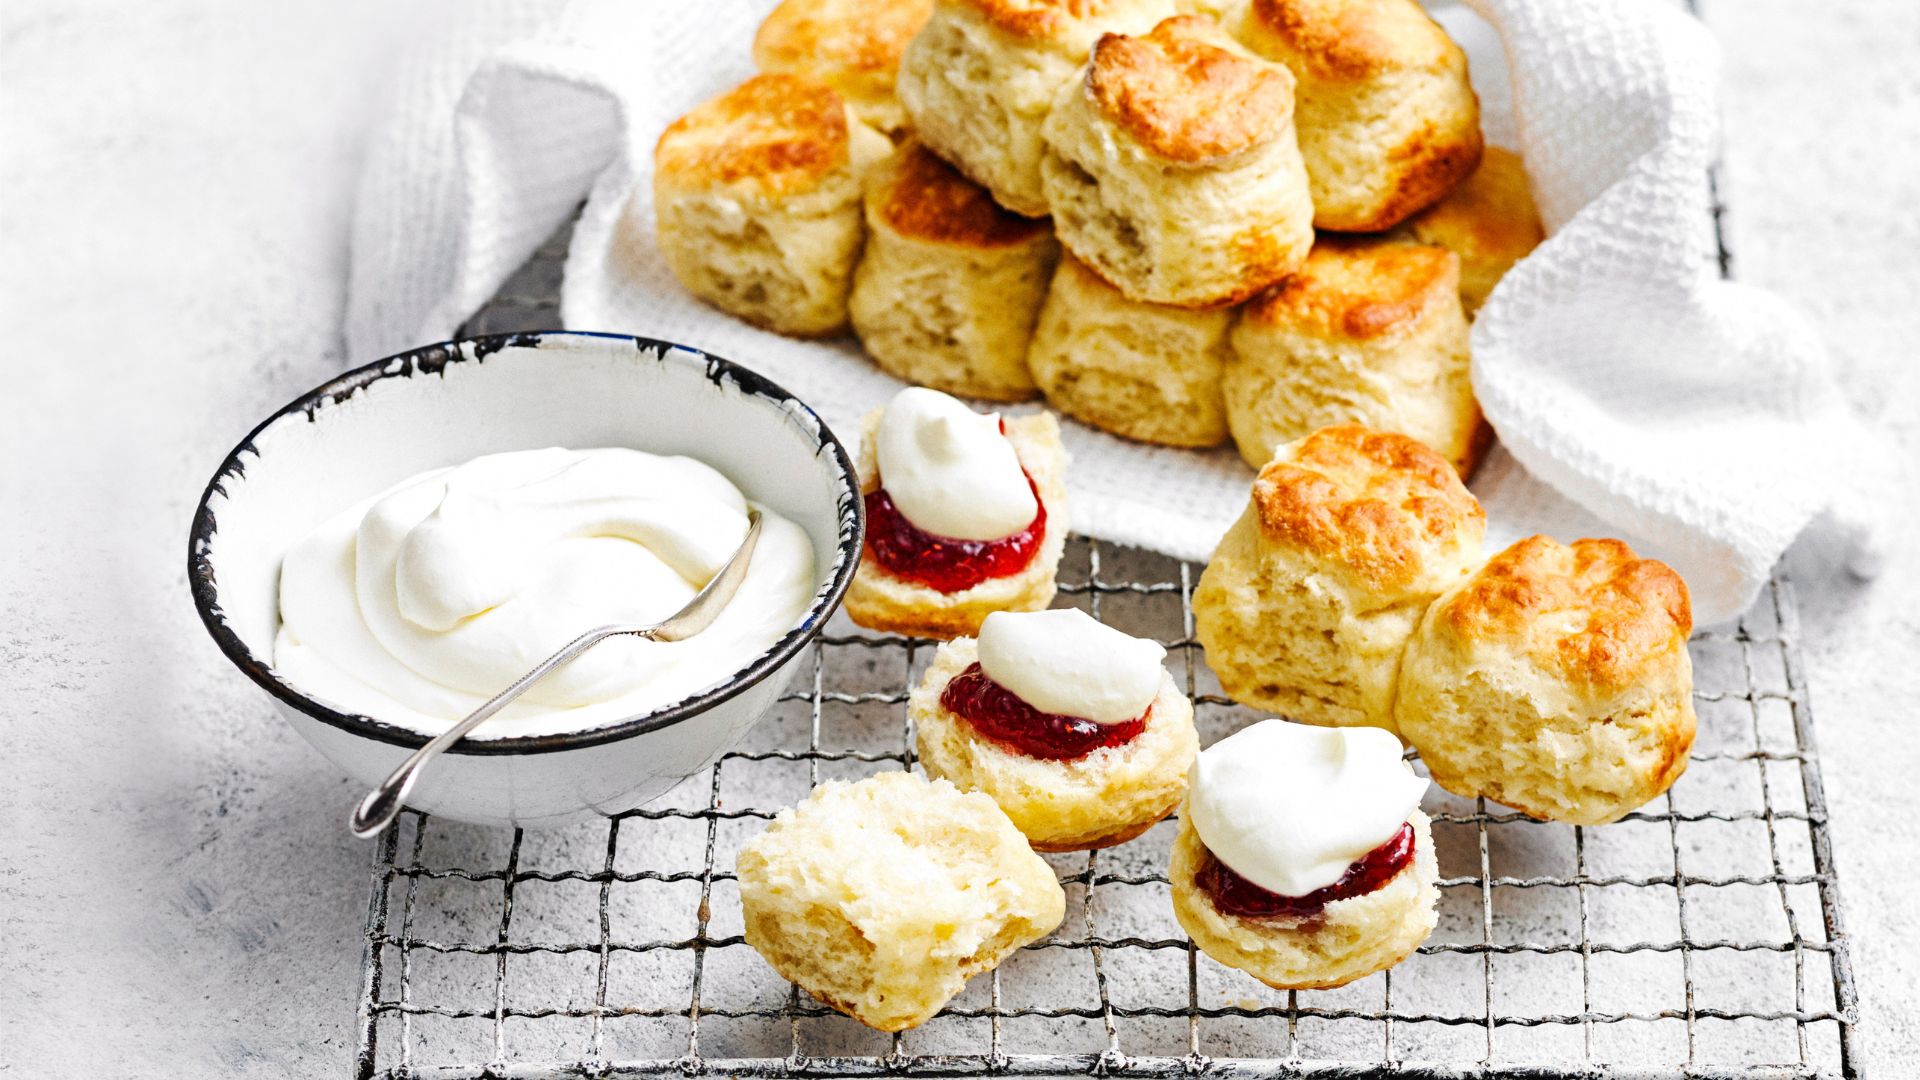 How to eat scones: jam or cream first?